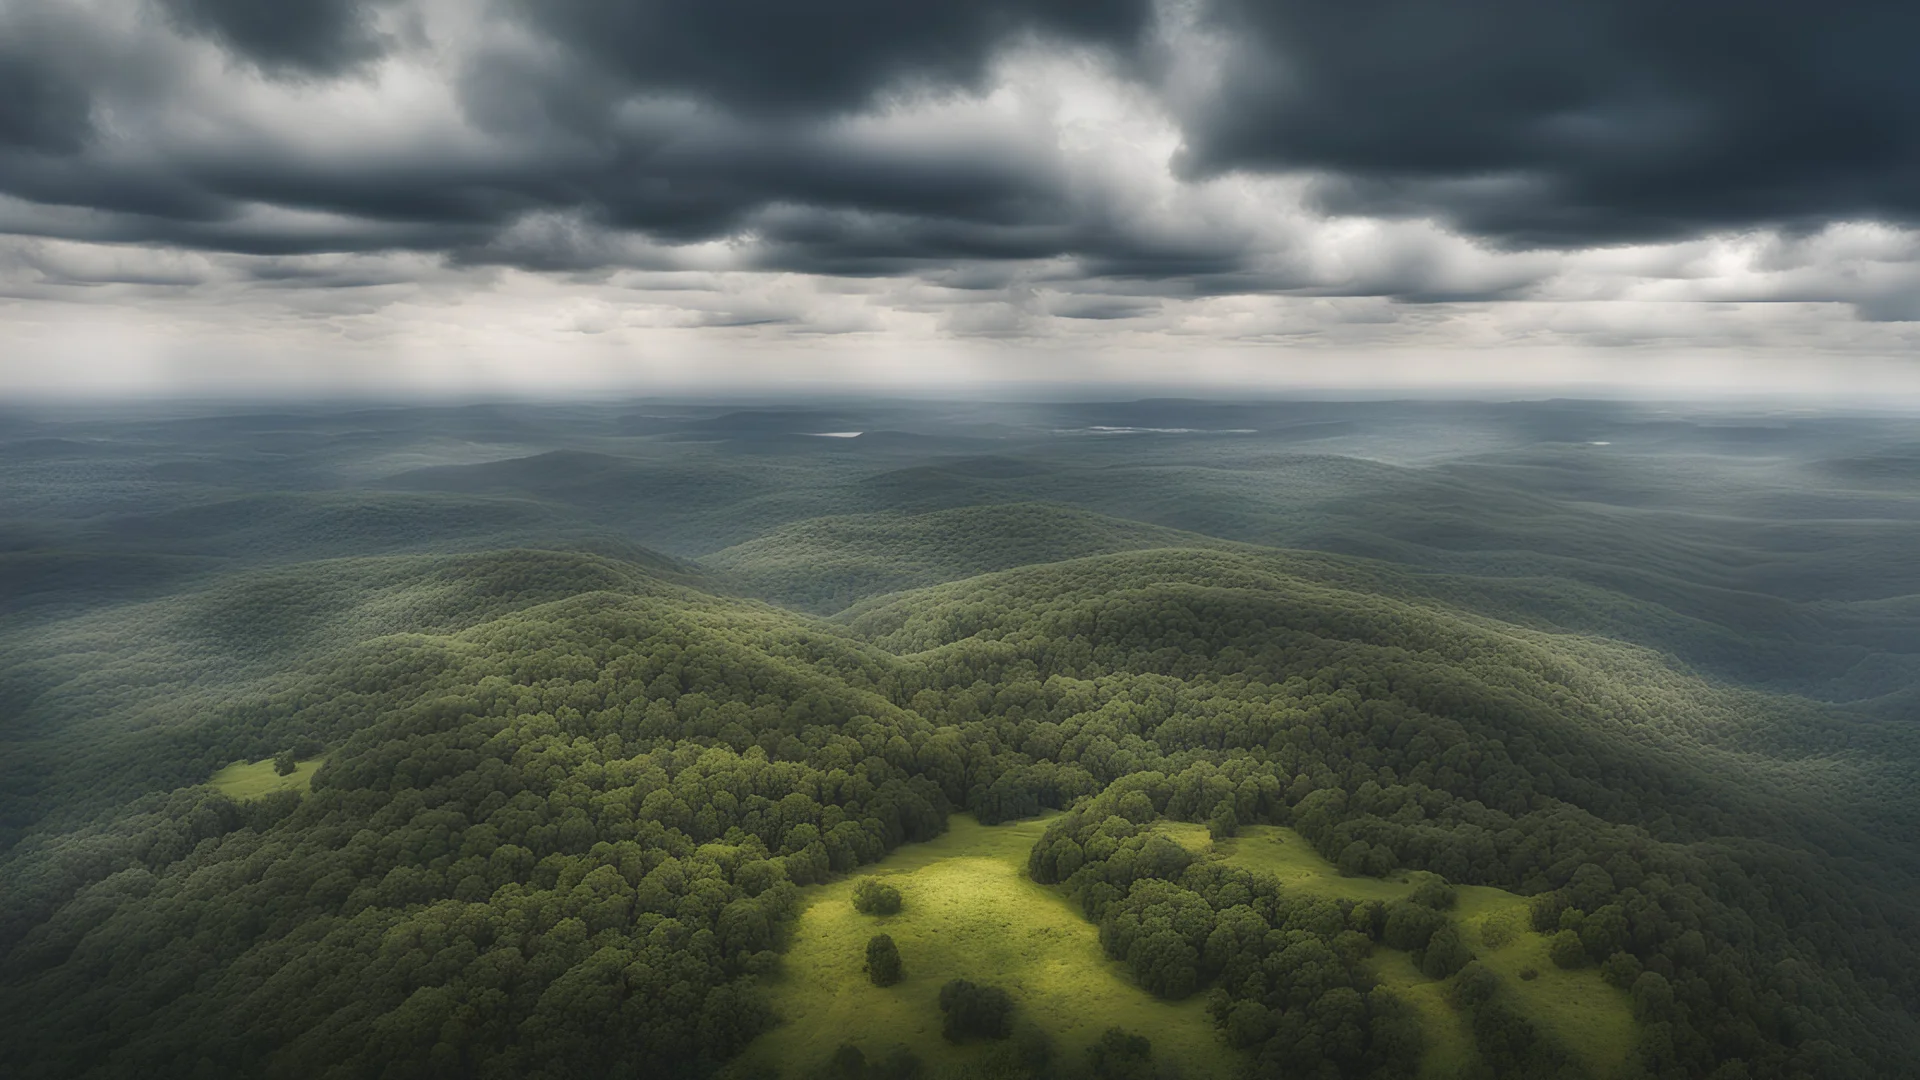 The forest goes beyond the horizon. A flat landscape. The sky is overcast. Spring. sky view, from above view. 10 miles above the ground. Beautiful Rainy clouds. Paint style. Many details. Satin ember new day. Vibrance! HDR tonong!